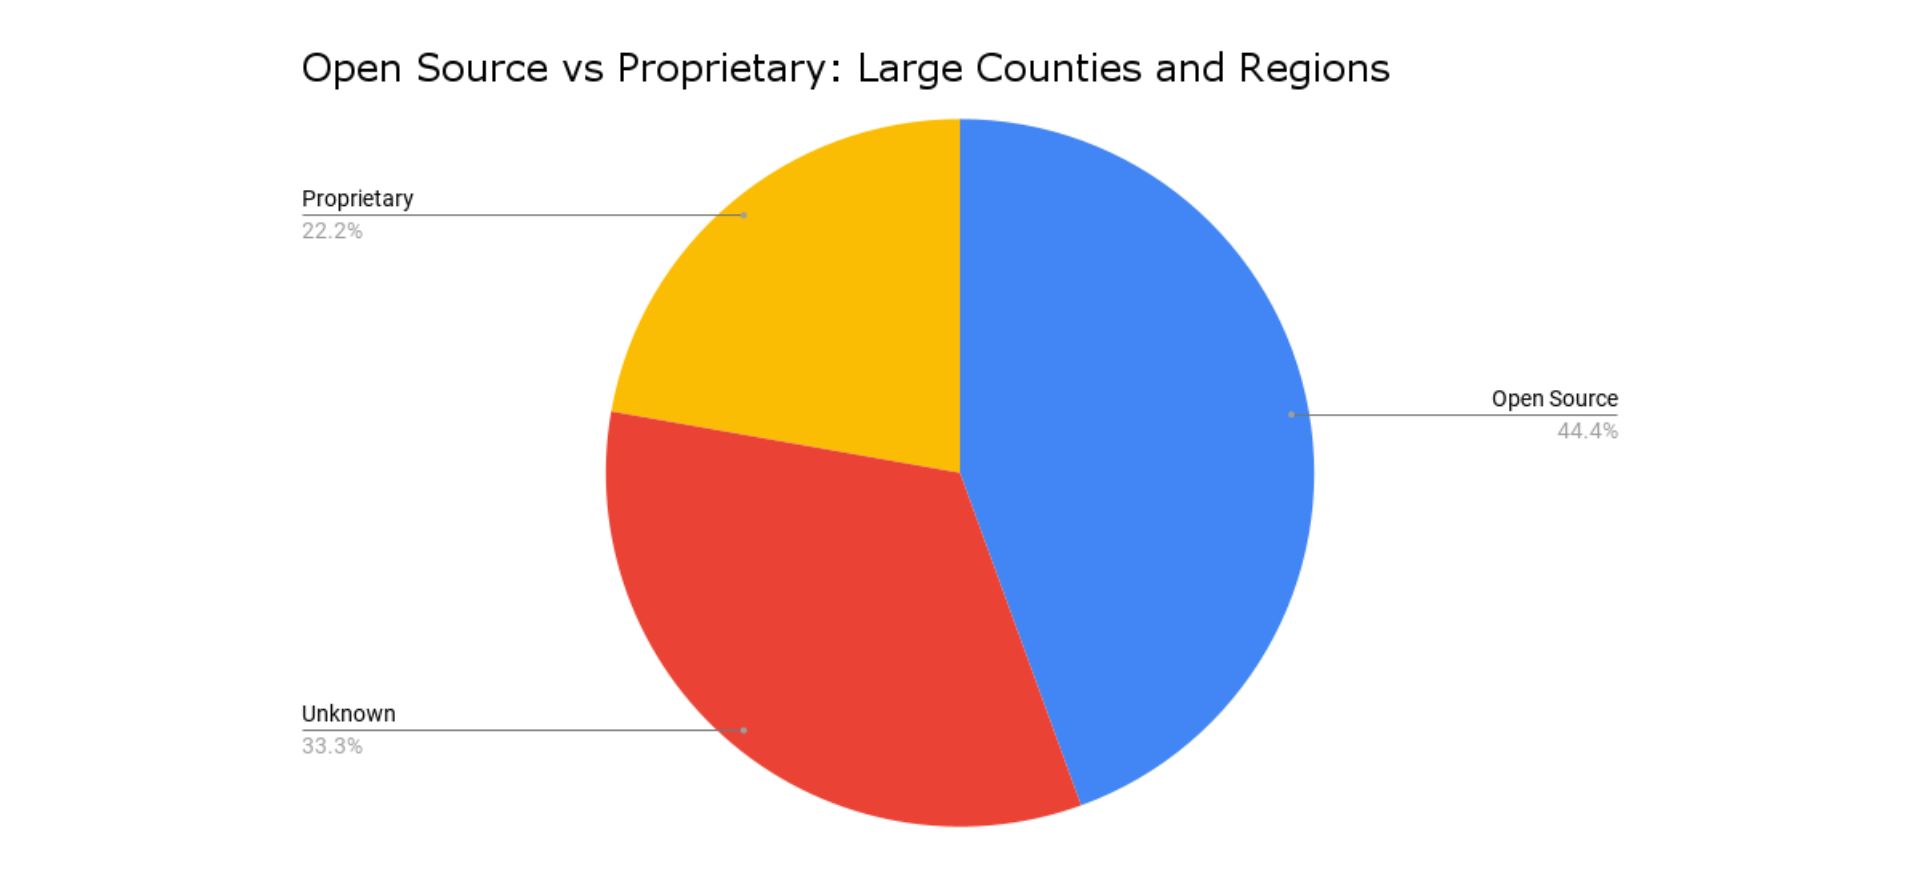 open source vs proprietary: large counties